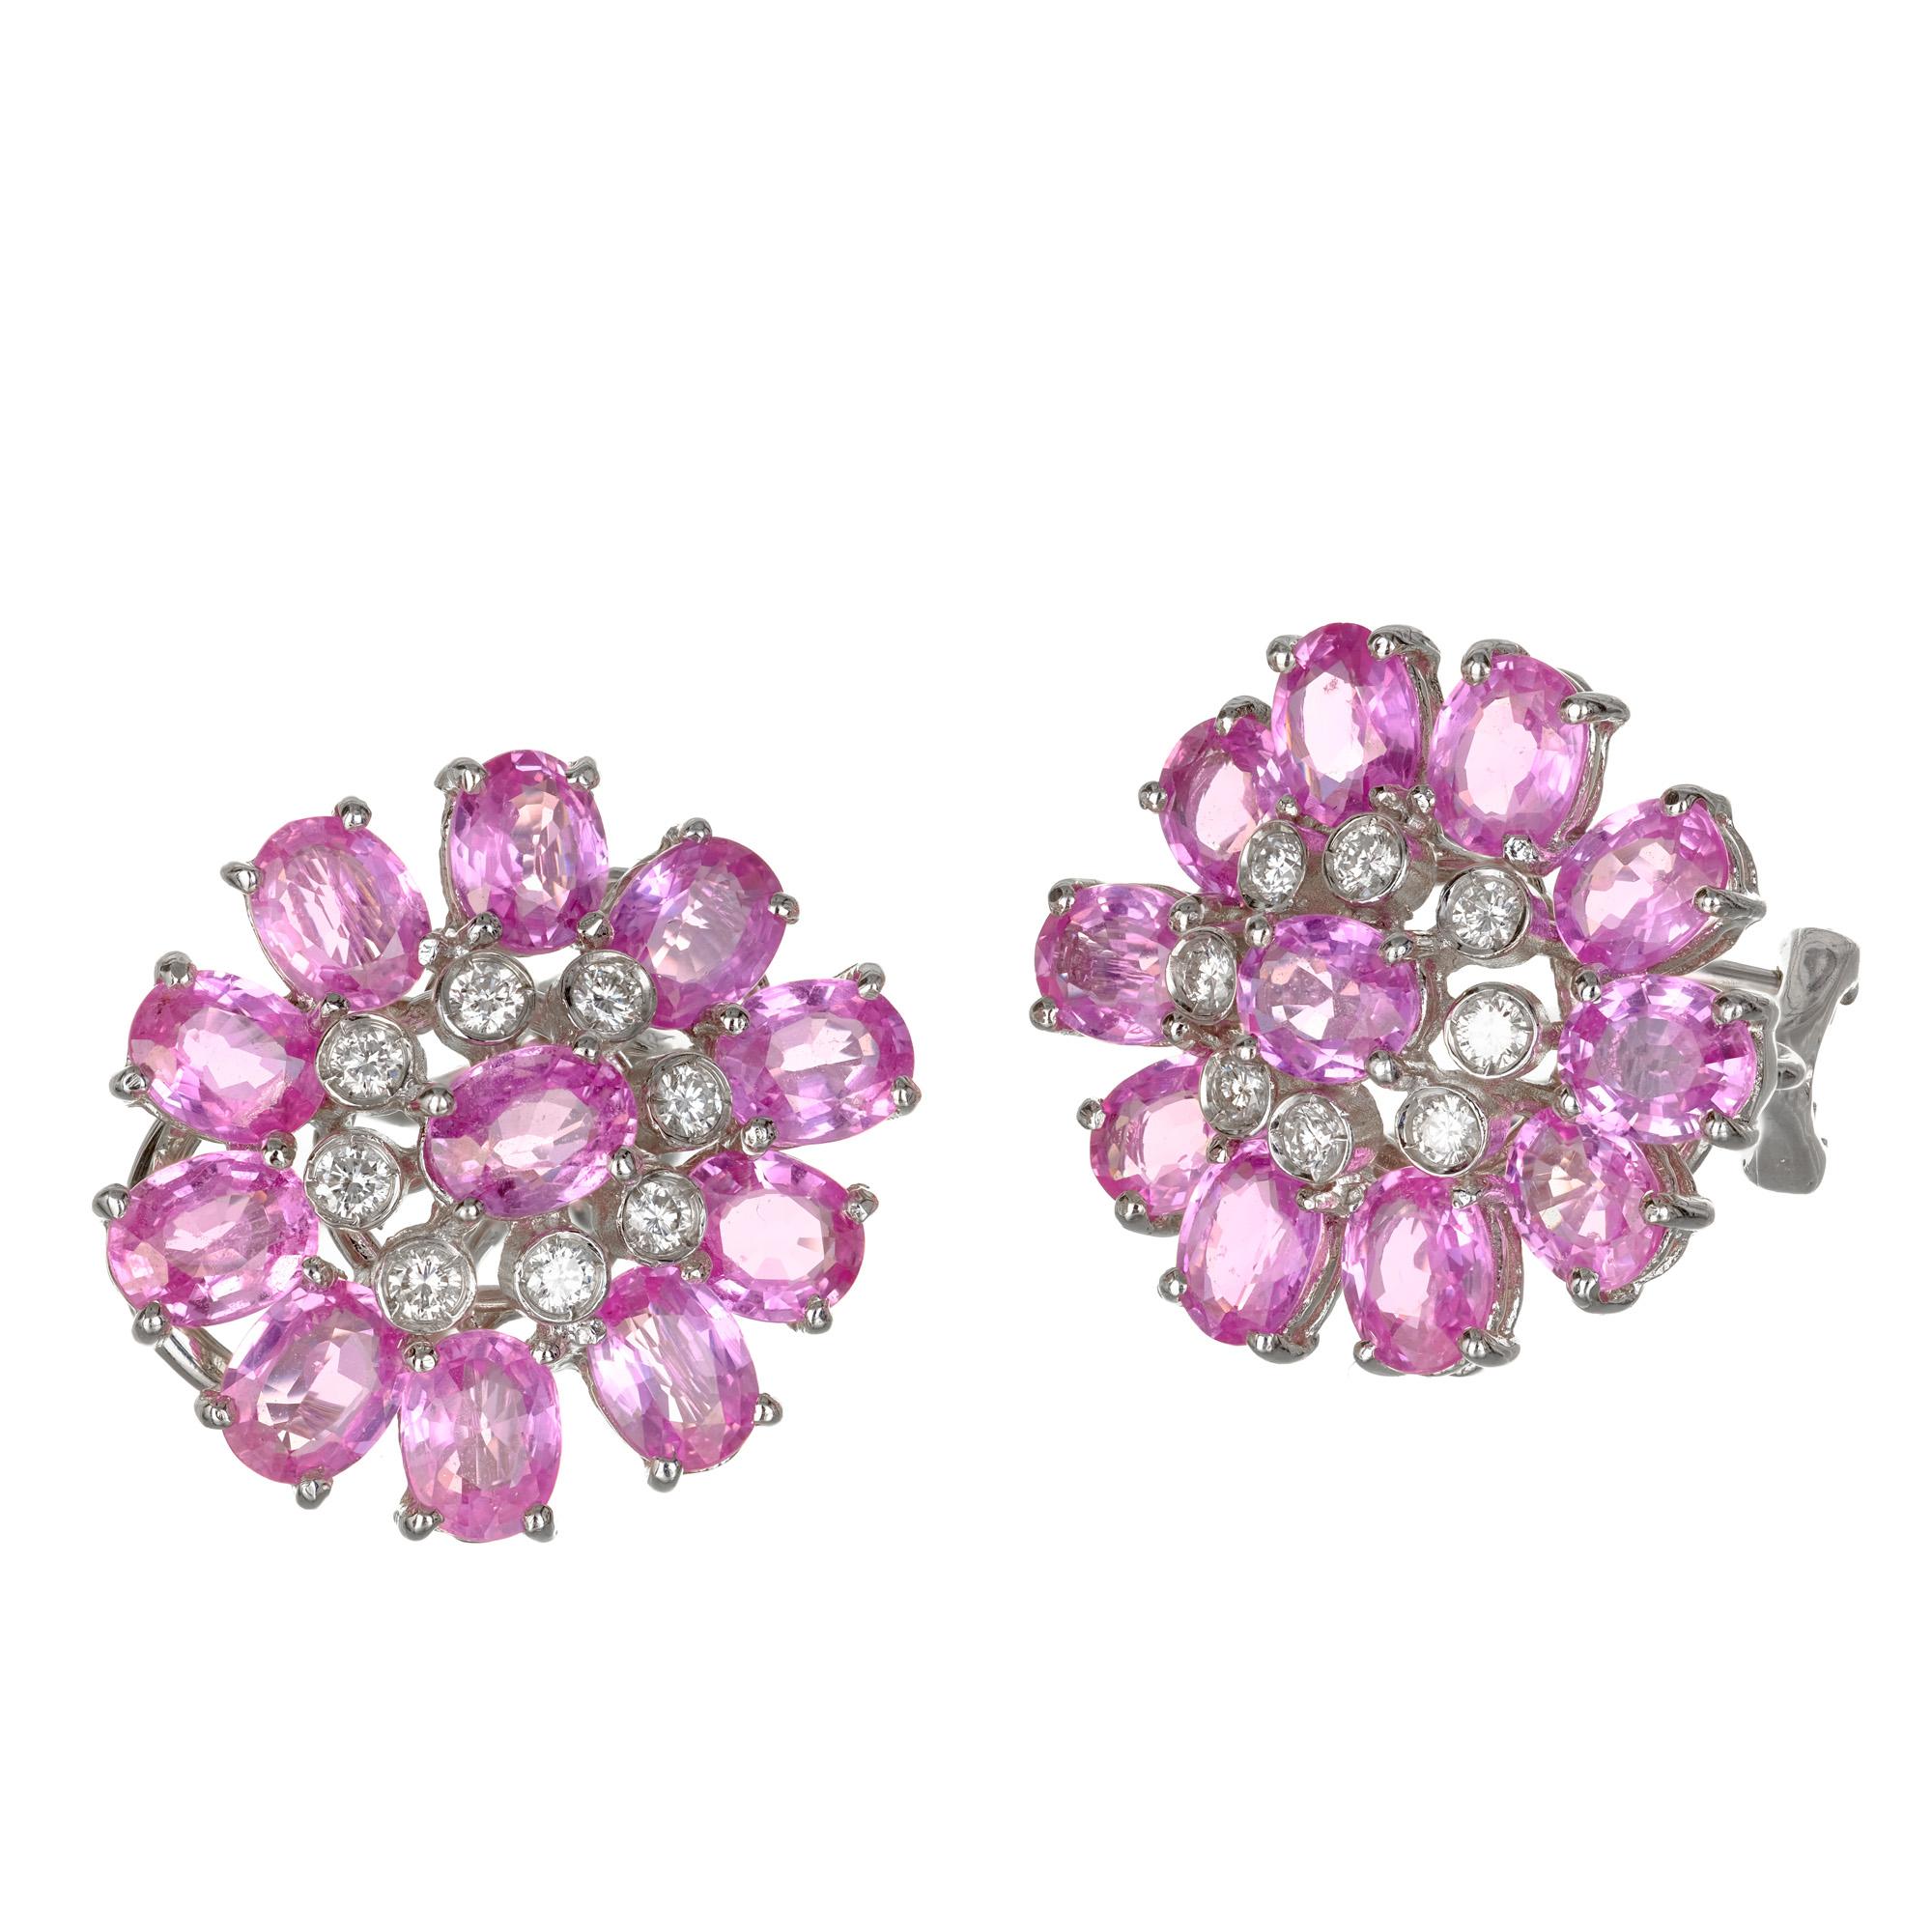 Oval sapphire and diamond cluster earrings. Clip post earrings with a hidden hook on the back to hang a pearl or other drop. 22 oval pink sapphires set in 18k white gold with 16 round accent diamonds. 

22 oval bright medium pink Sapphires, well